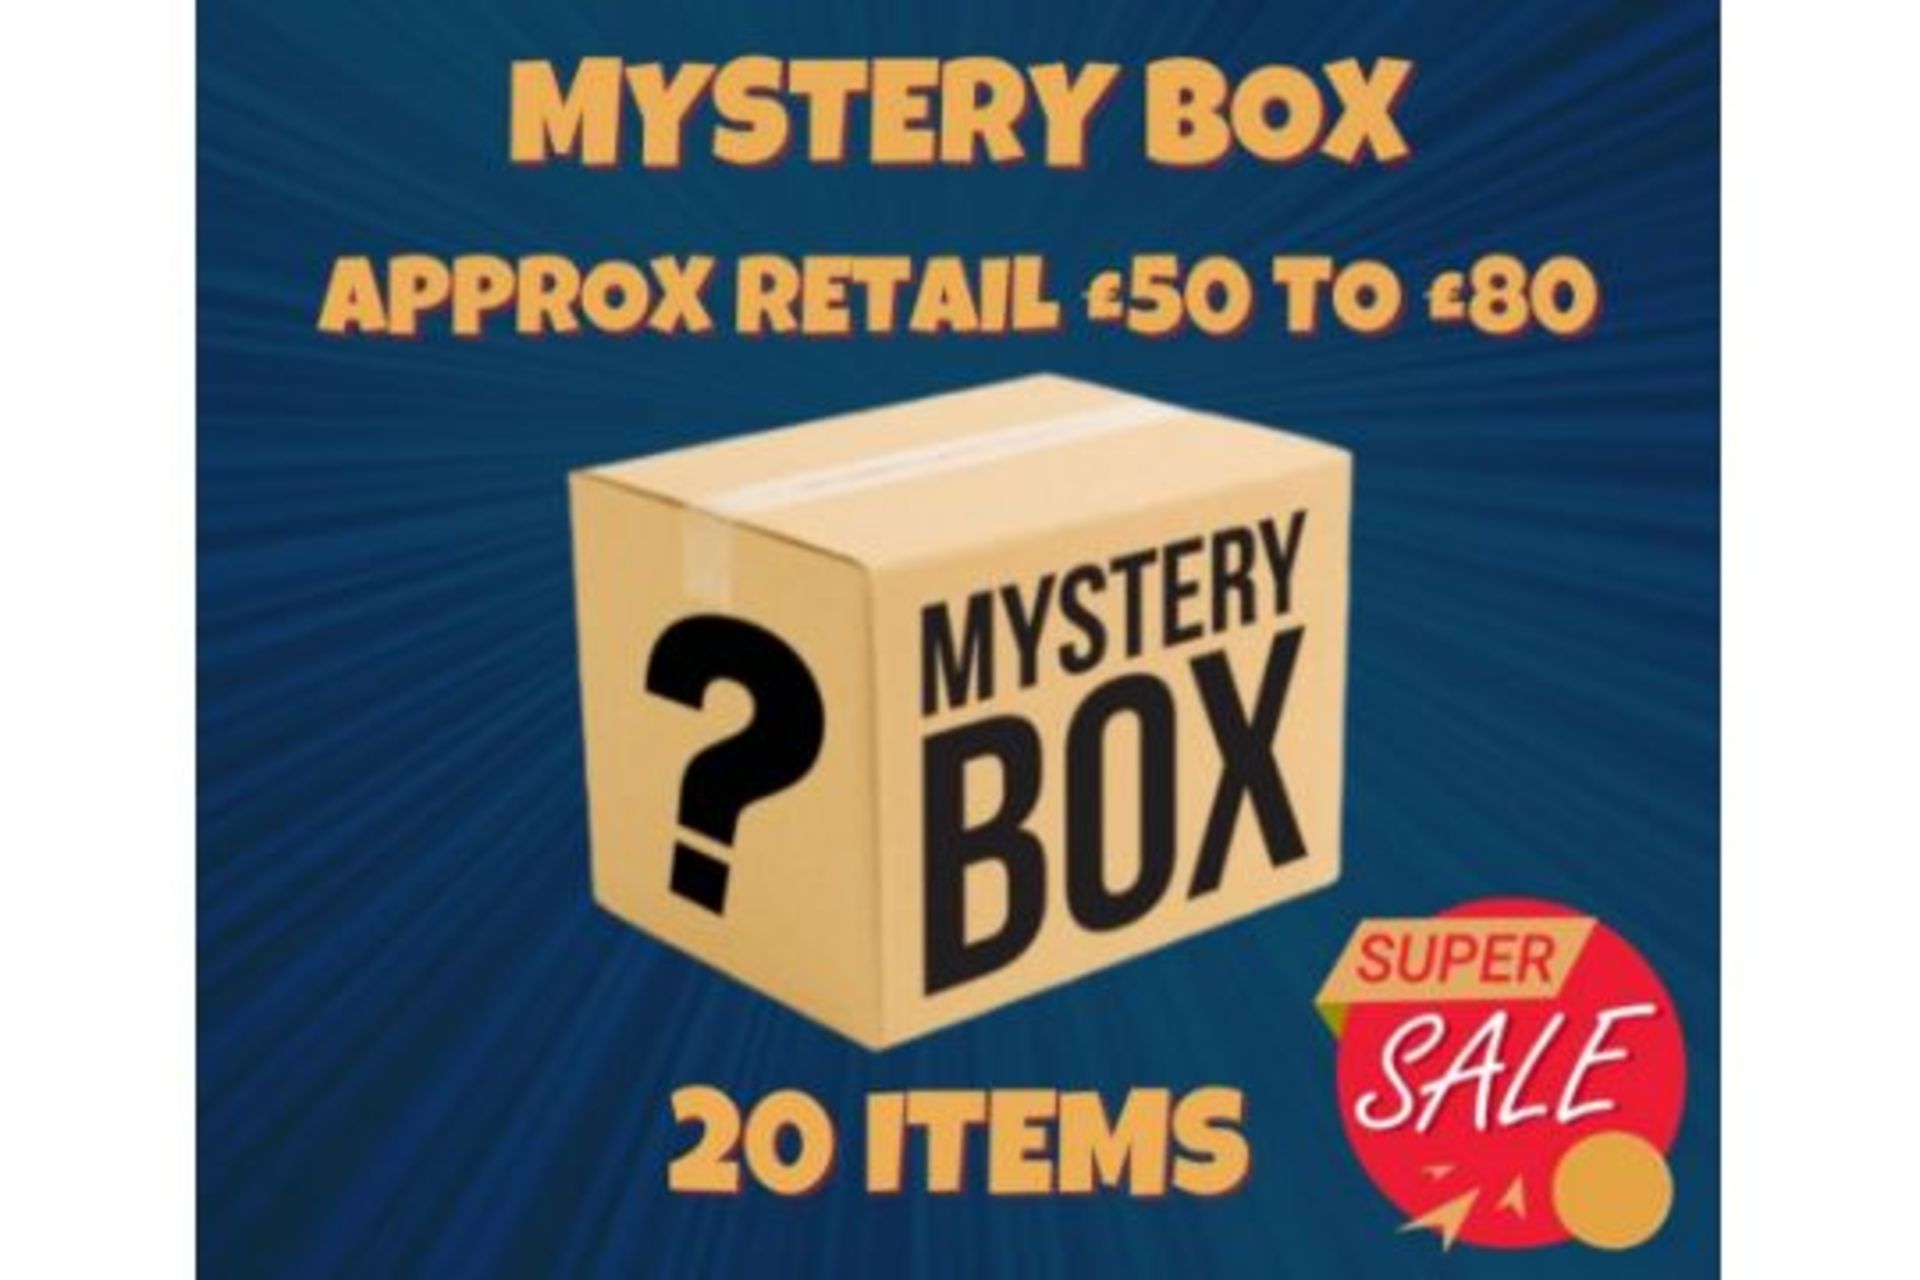 NEW MYSTERY BOX WITH 20 NEW ASSORTED AMAZON ITEMS - BOX CONTENTS RRP £50 TO £80 - PLUS 3 FREE DVDS